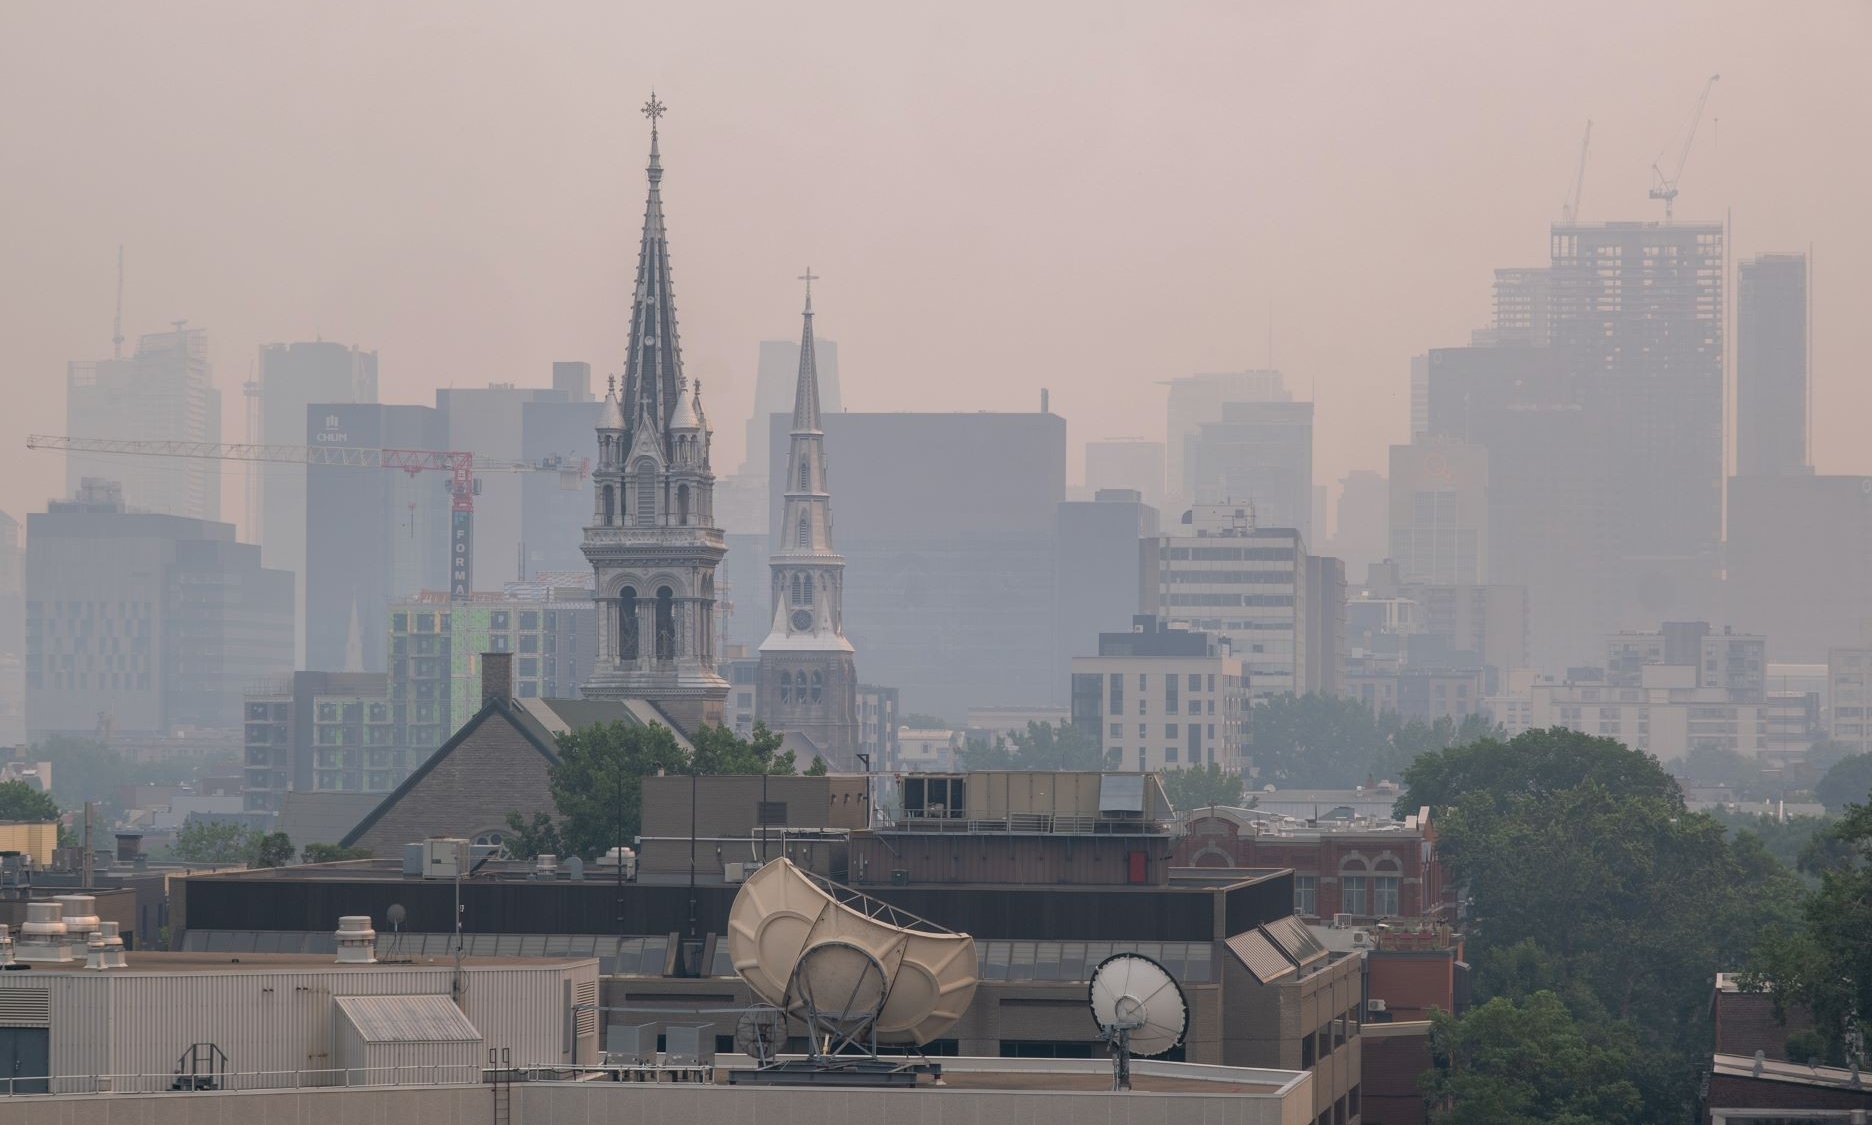 A cityscape obscured by a haze, with the spires of two churches prominently rising in the foreground. The background shows obscured buildings and construction cranes, indicating ongoing development. Satellite dishes and rooftop equipment are visible on the buildings in the foreground, contrasting the old and the new in an urban environment with air quality issues.